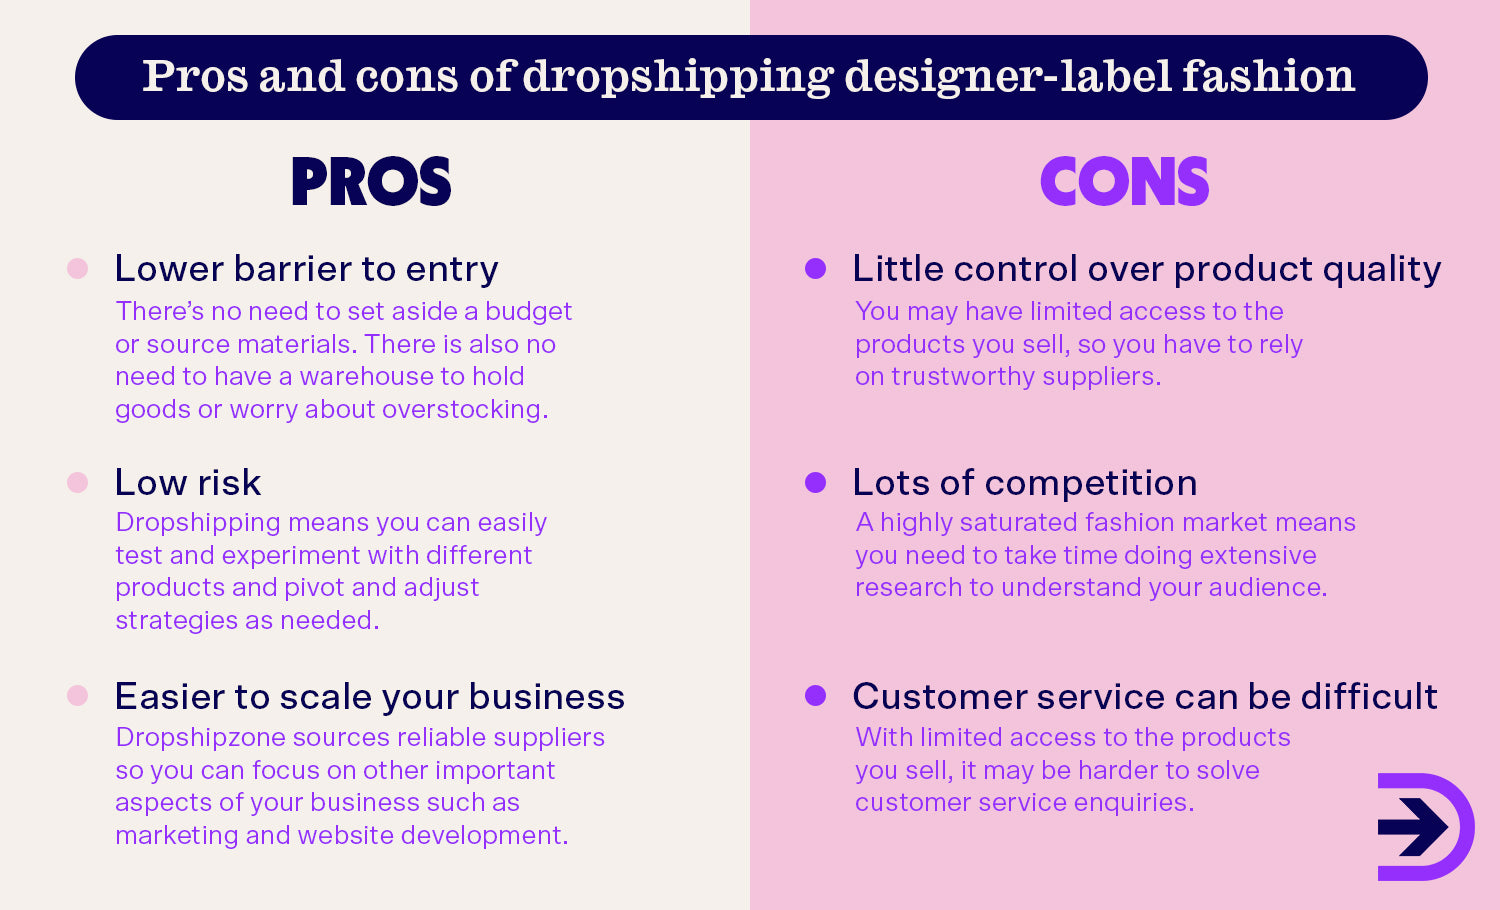 Designer fashion can be a lucrative dropshipping niche that has a lower barrier to entry but there can be drawbacks due to limited access to the product.